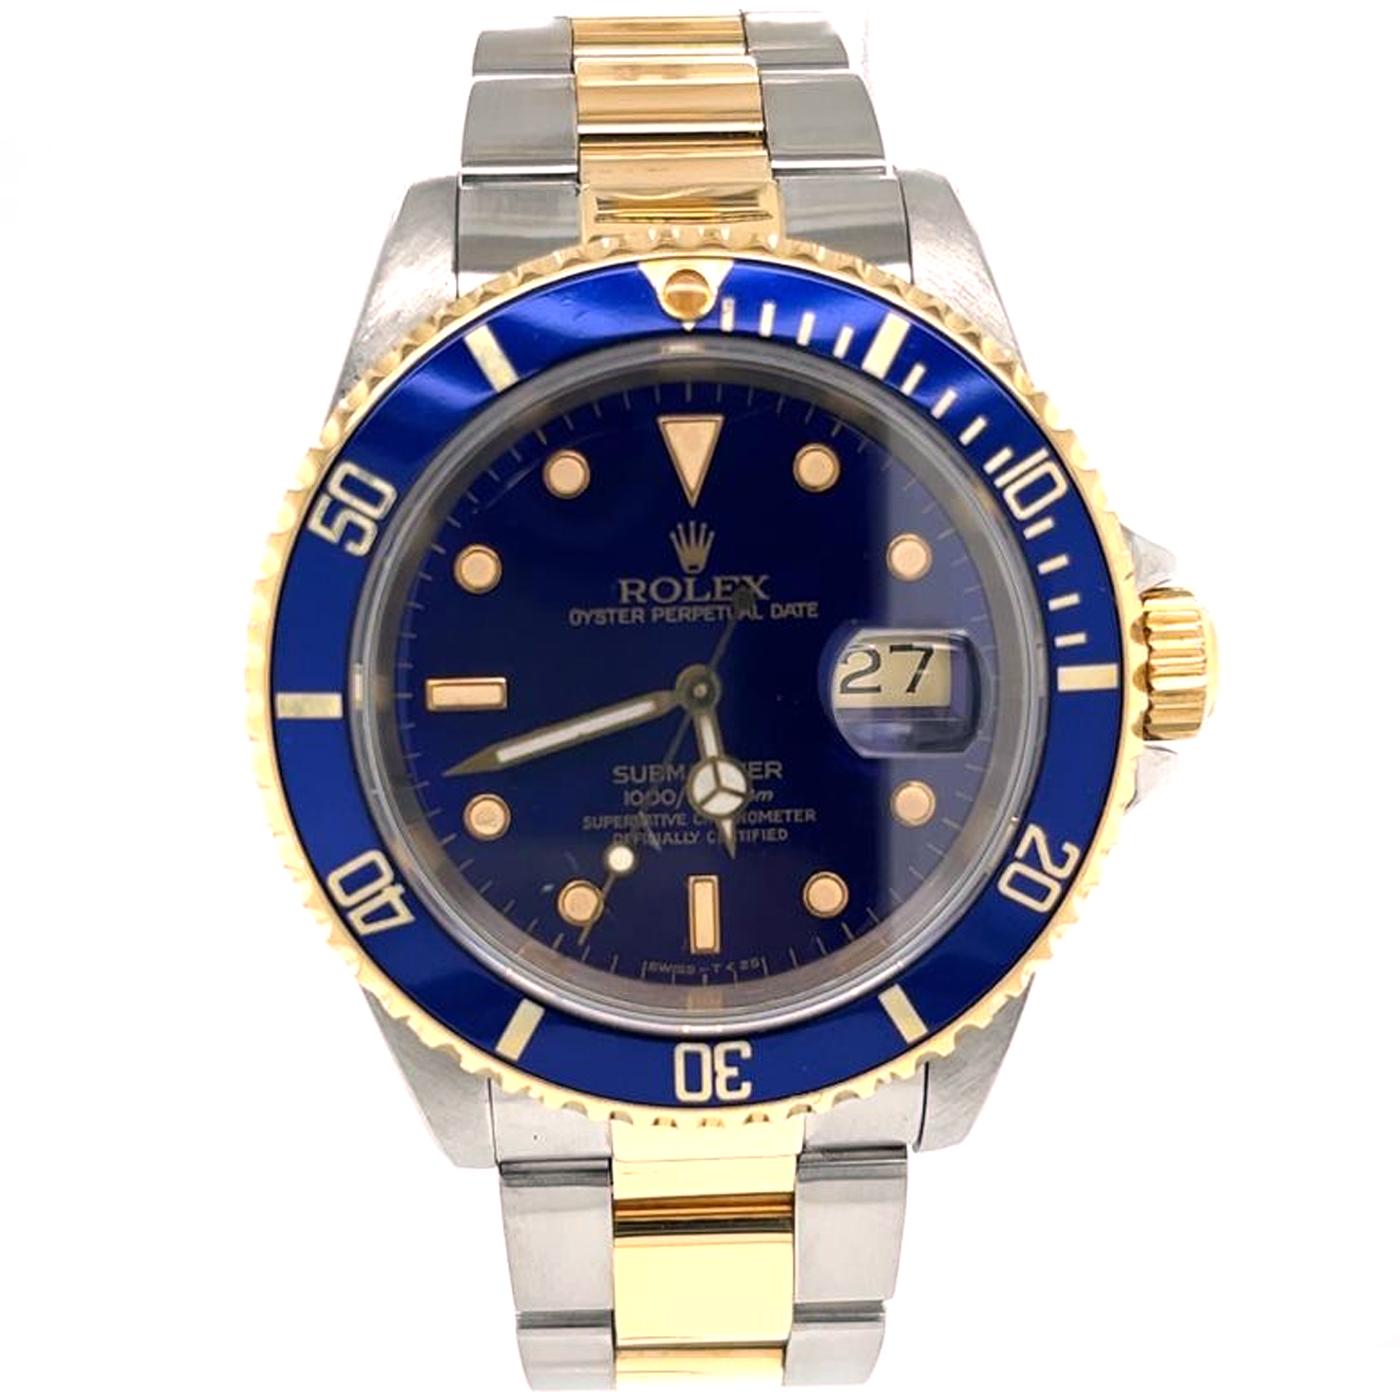 Rolex Submariner in stainless steel and 18k yellow gold, 16613. On the original stainless steel and 18k yellow gold Oyster bracelet with stainless steel and 18k yellow gold flip-lock de-ployant clasp. 18k yellow gold bezel with a blue aluminum bezel